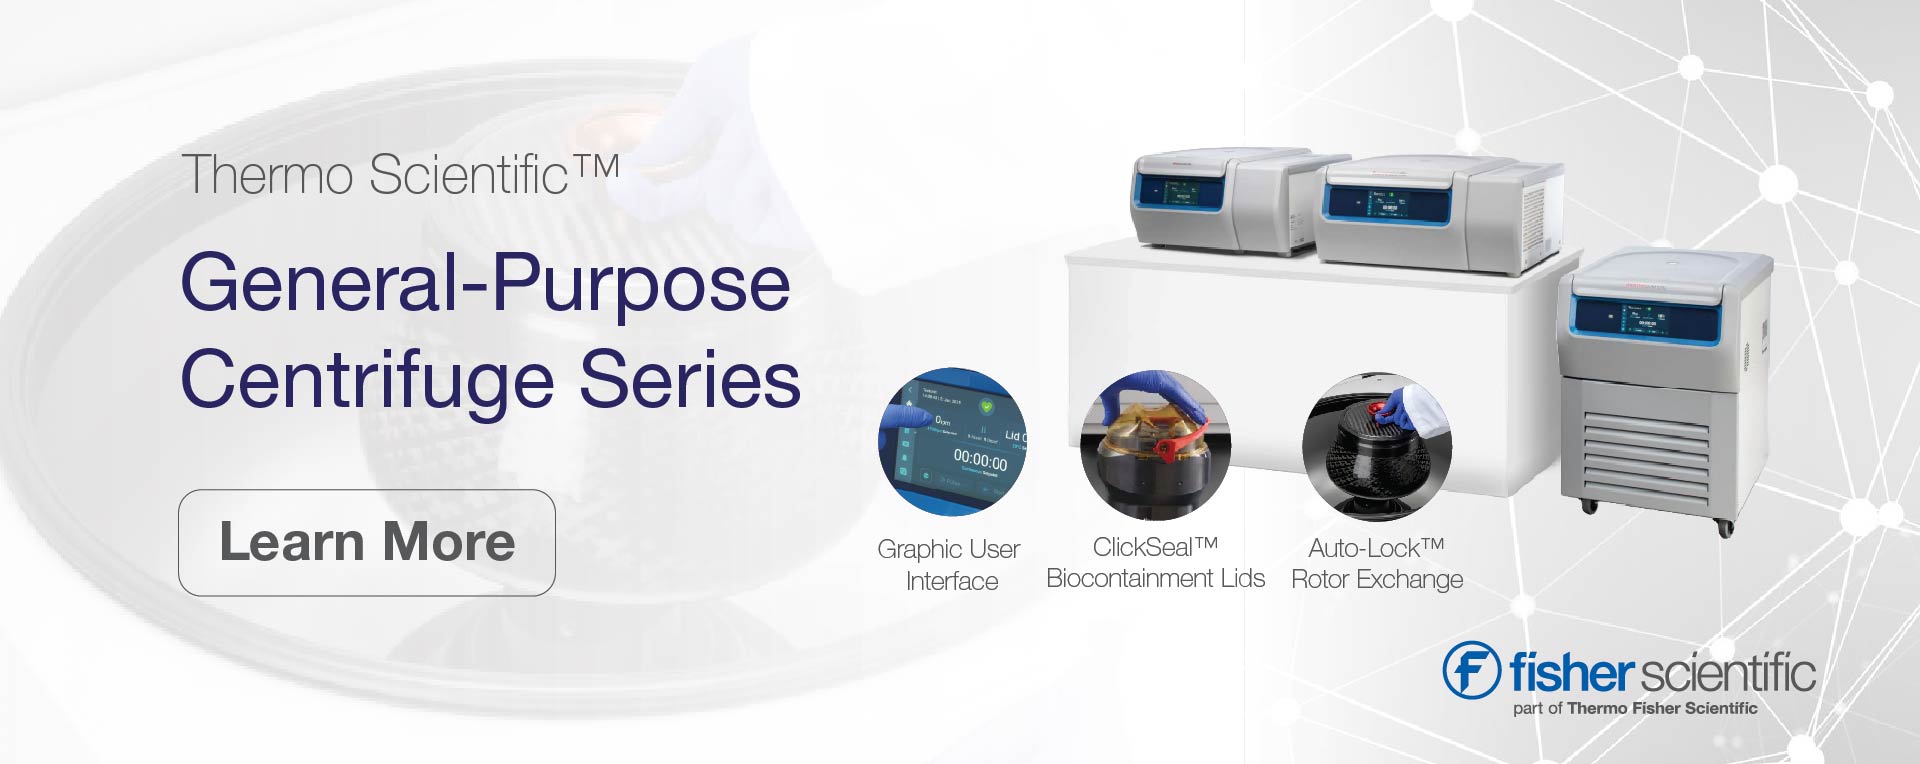 https://myfisherstore.com/malaysia/blog/post/thermo-scientific-general-purpose-centrifuge-series/